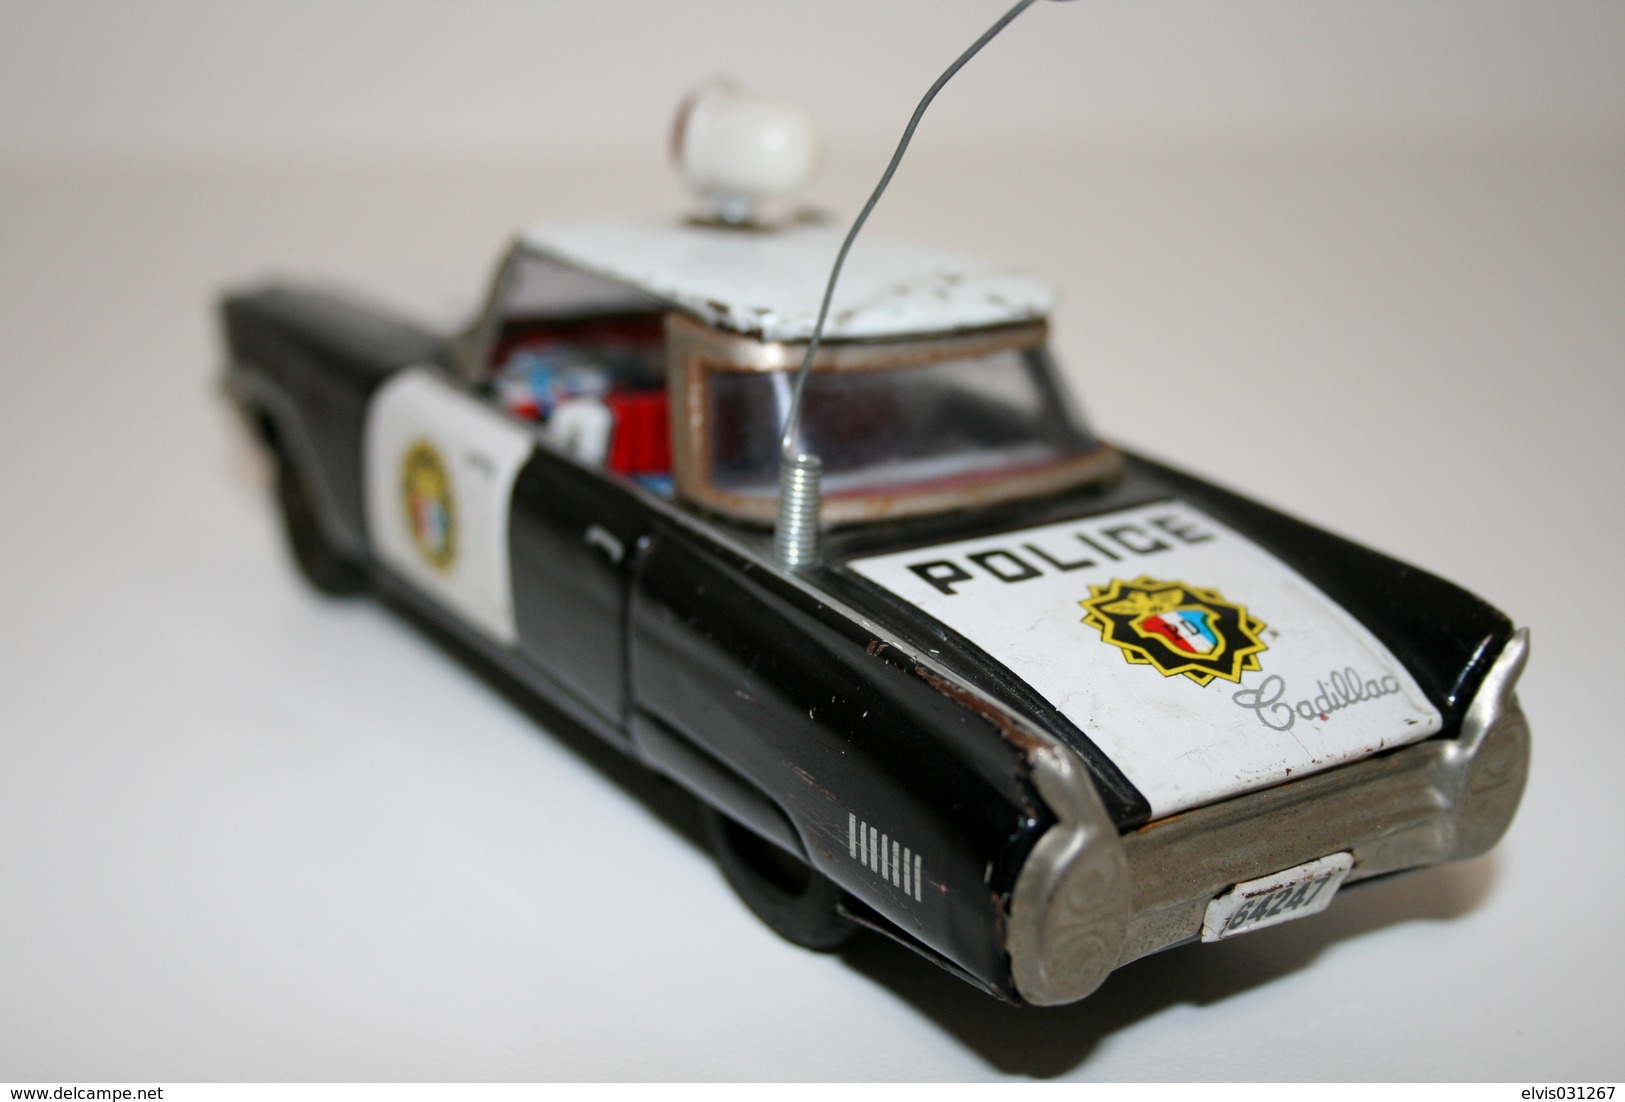 Vintage TIN TOY CAR : Maker ICHICO - Cadillac 4 Door Hardtop Rotating Roof Light POLICE - 15cm - JAPAN - 1960 - Friction - Collectors E Strani - Tutte Marche